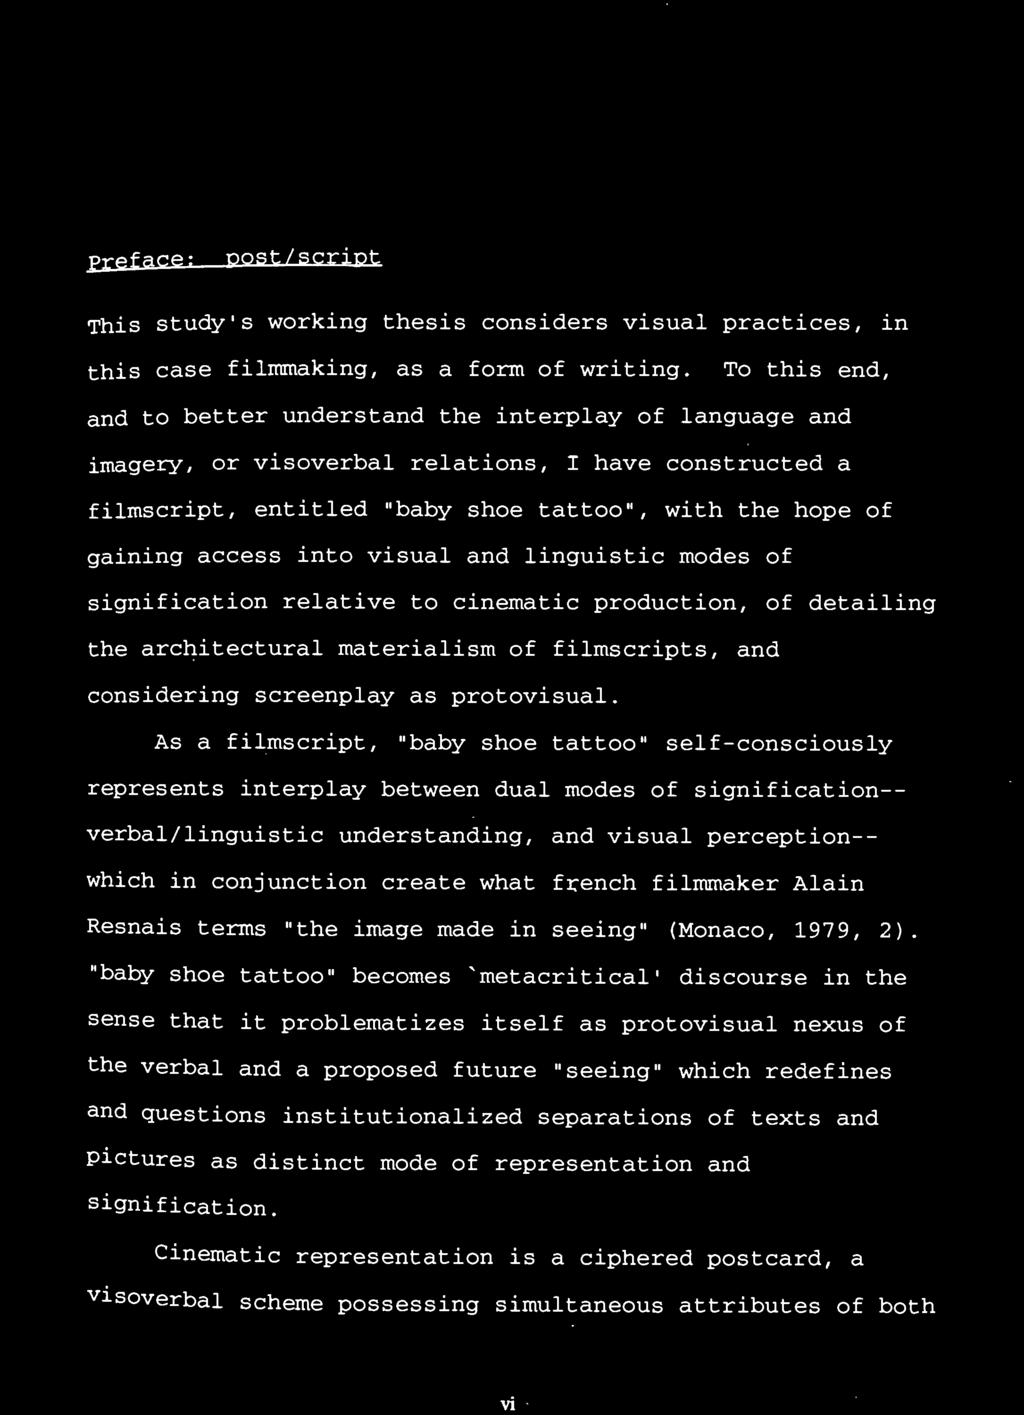 into visual and linguistic modes of signification relative to cinematic production, of detailing the architectural materialism of filmscripts, and considering screenplay as protovisual.